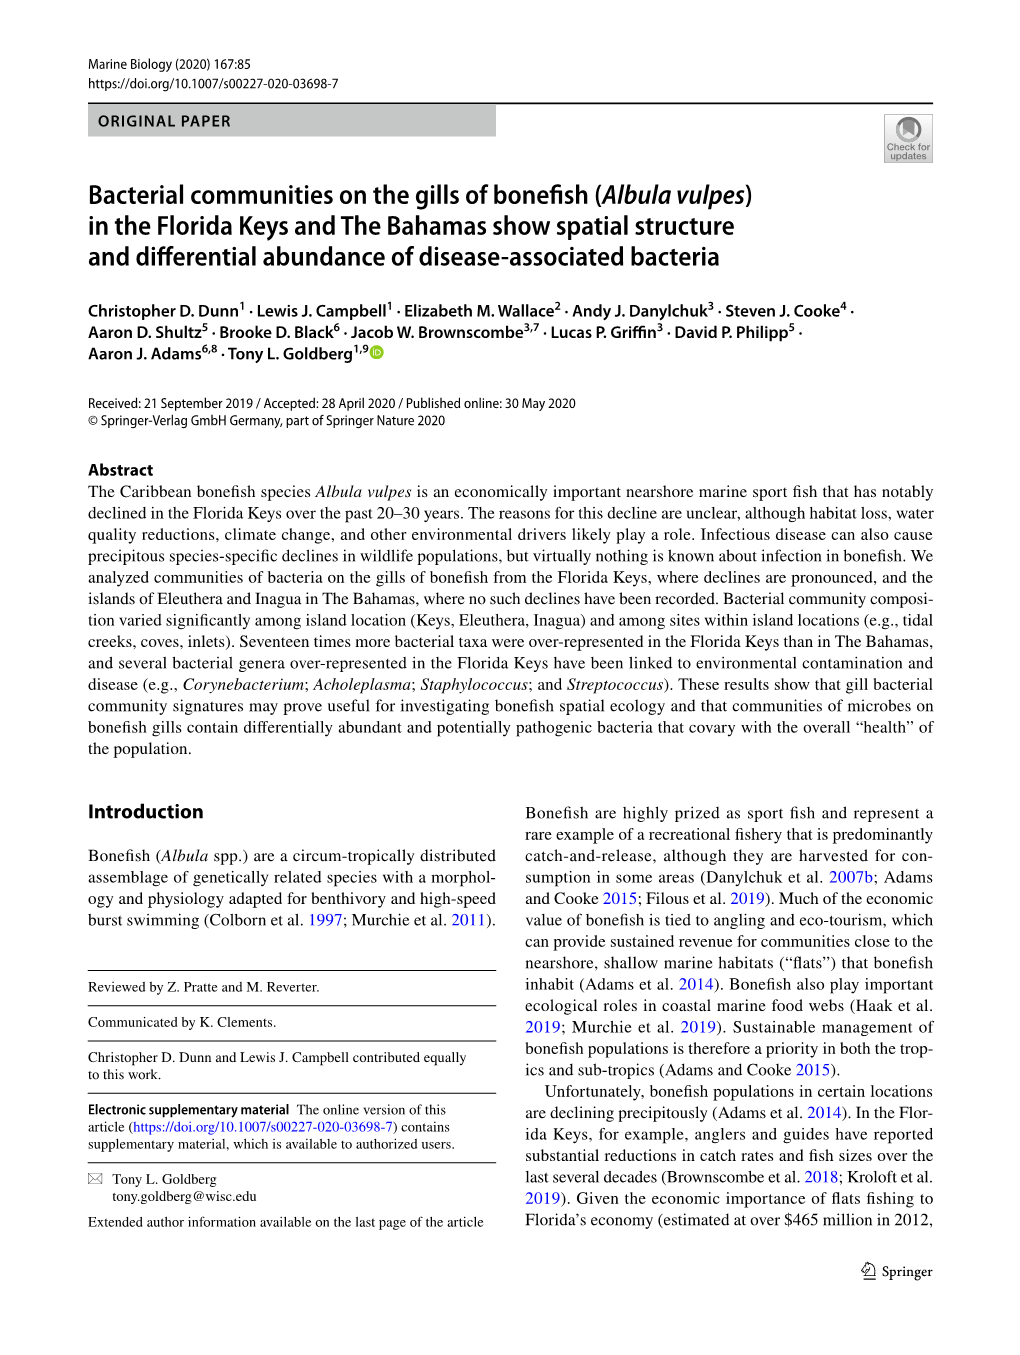 Bacterial Communities on the Gills of Bonefish (Albula Vulpes) in the Florida Keys and the Bahamas Show Spatial Structure and Di